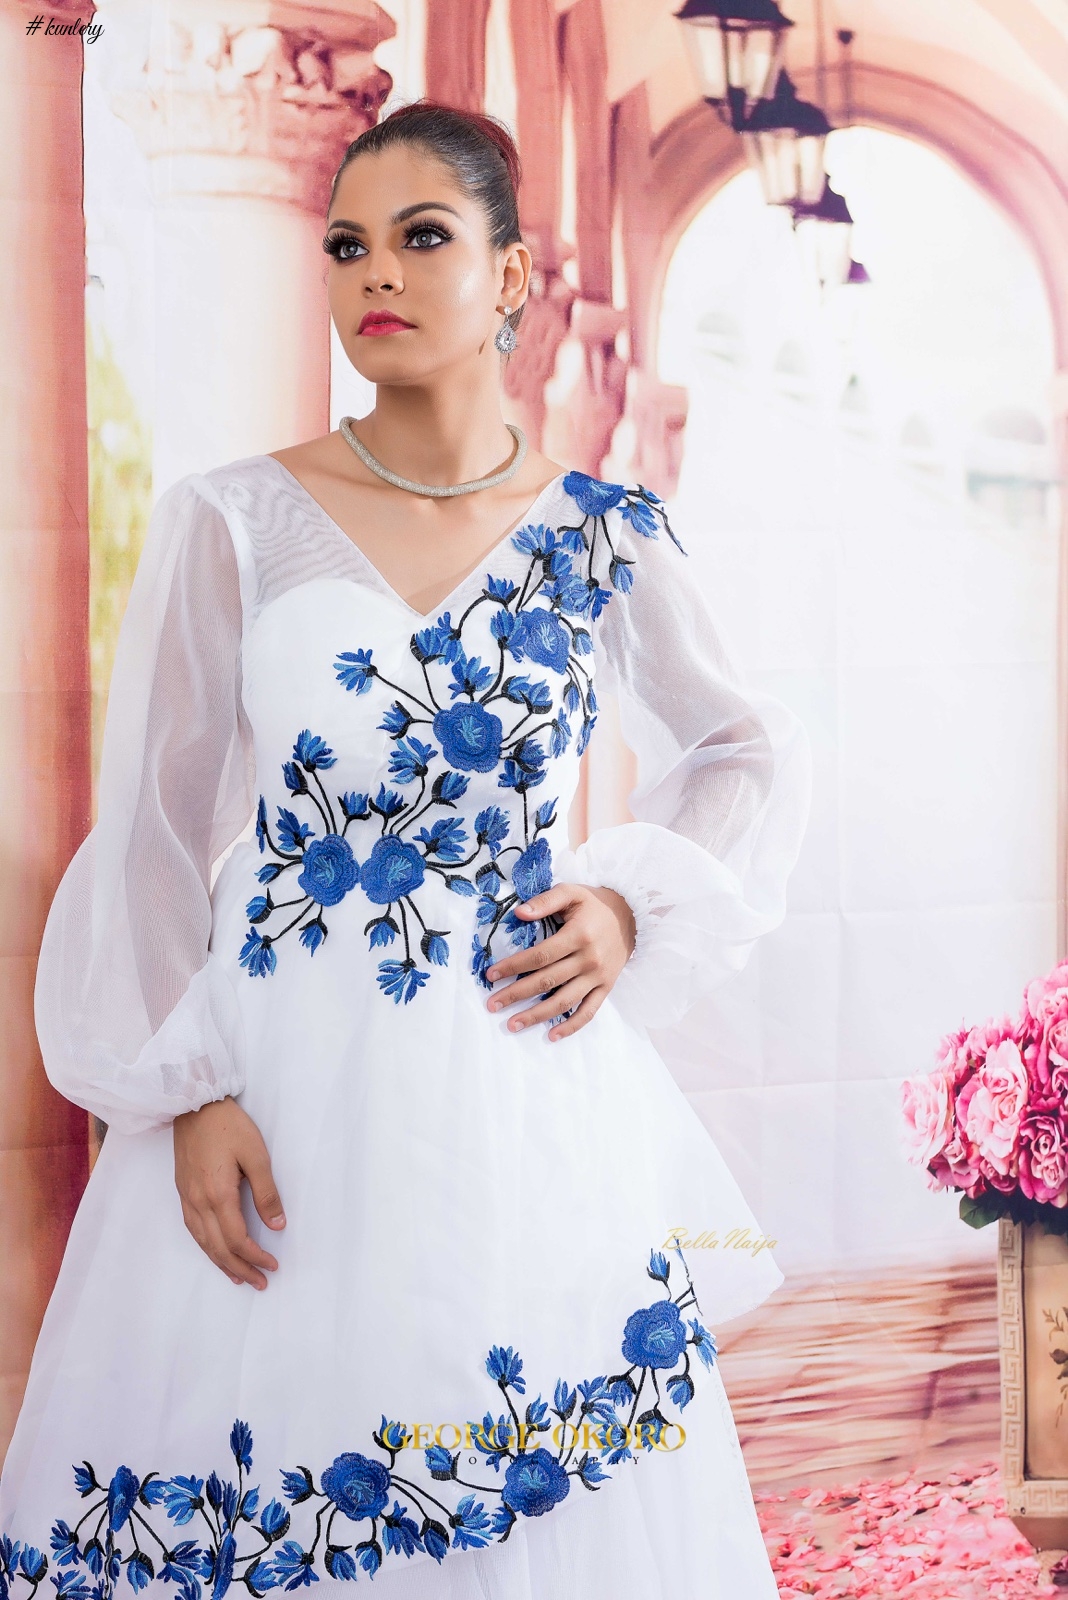 Gimbiyya Atelier Unveils It’s First Bridal Collection For the Beautiful Yet Nontraditional Bride